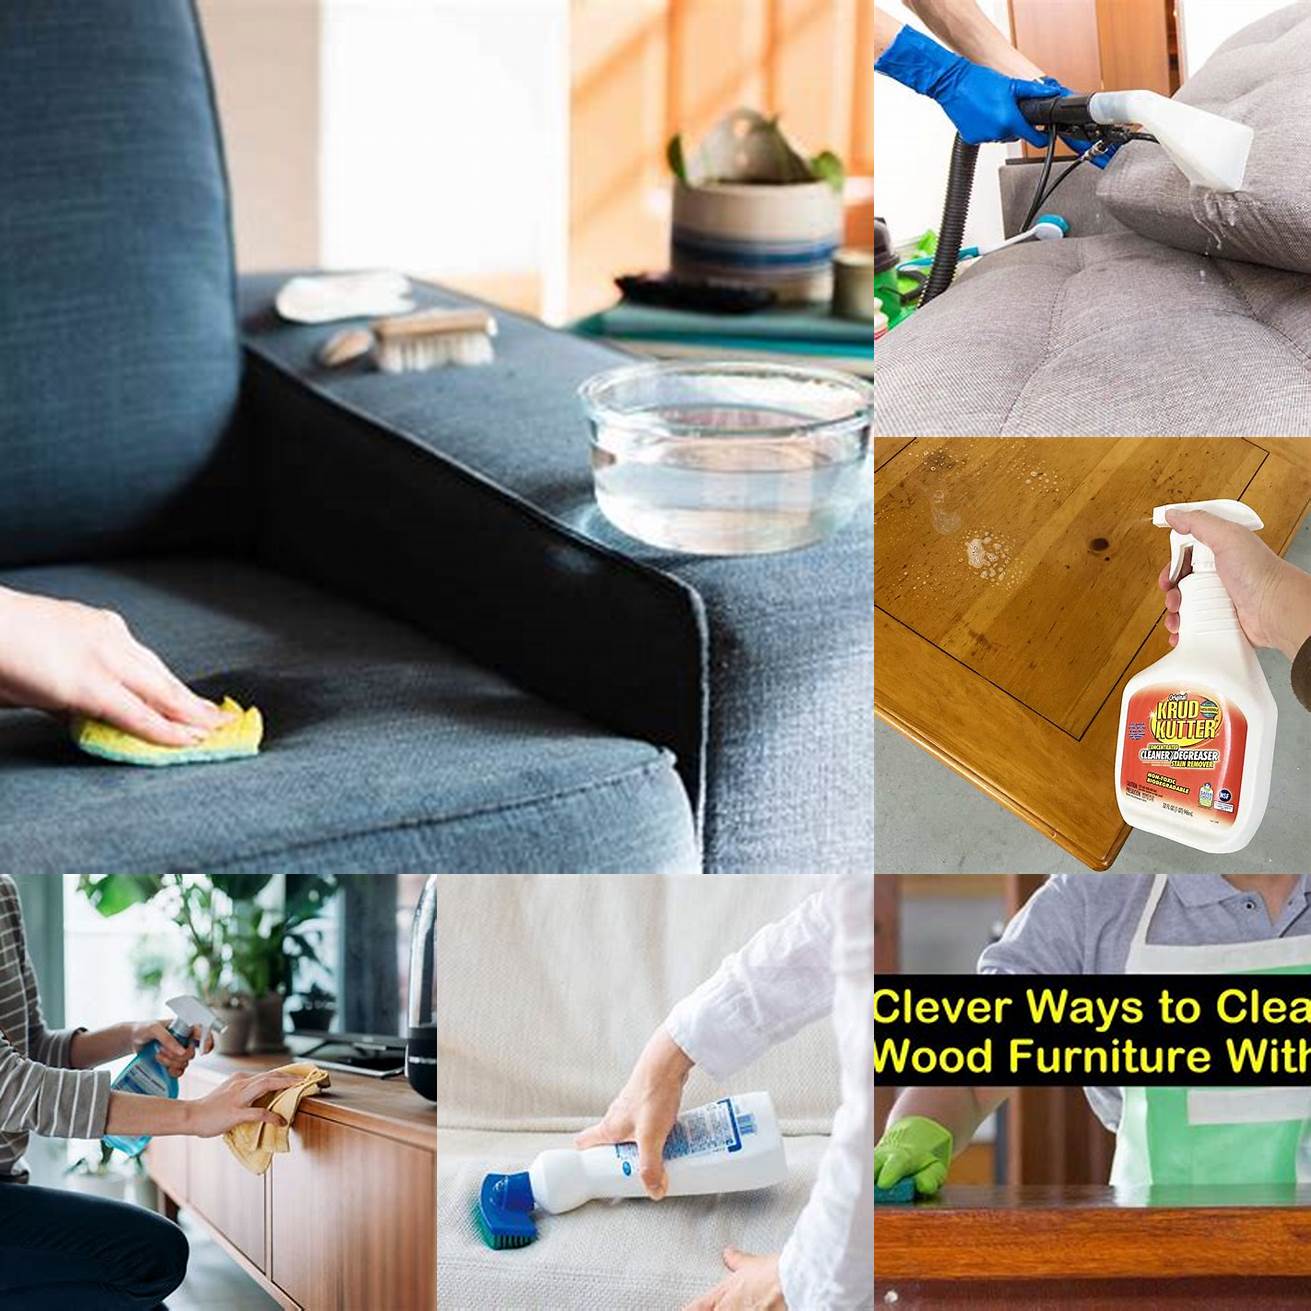 Apply a cleaning solution